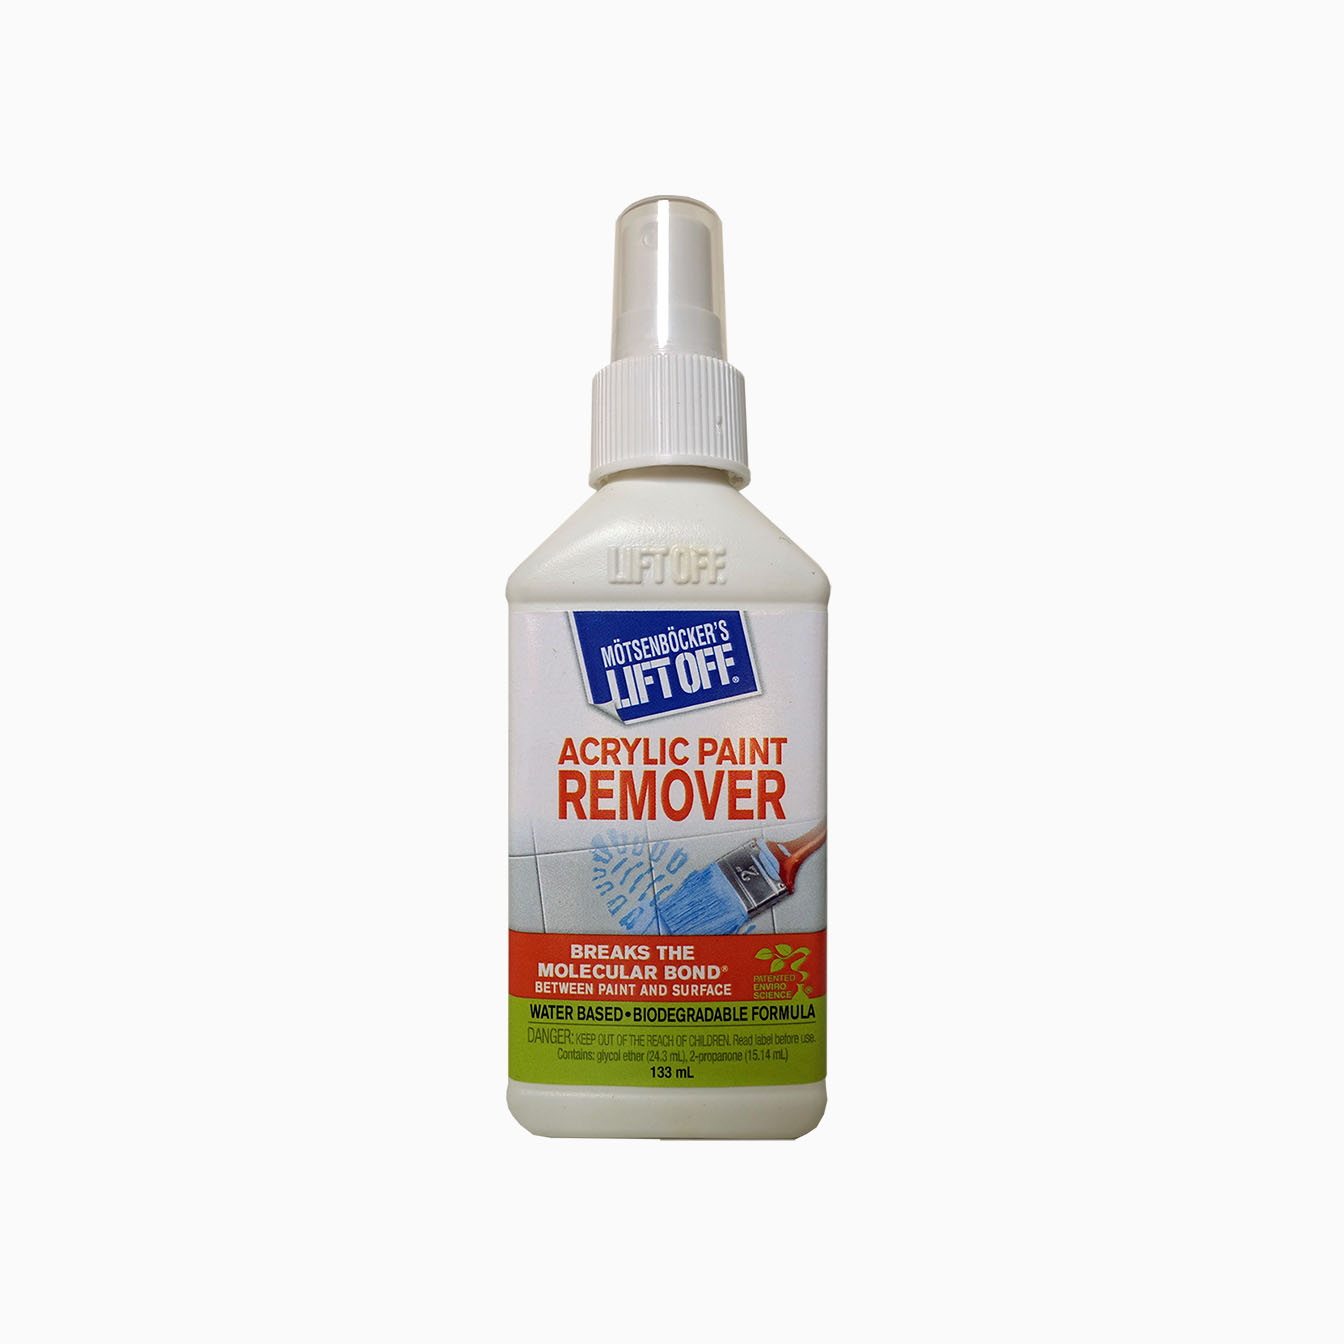 Lift Off Acrylic Paint Remover